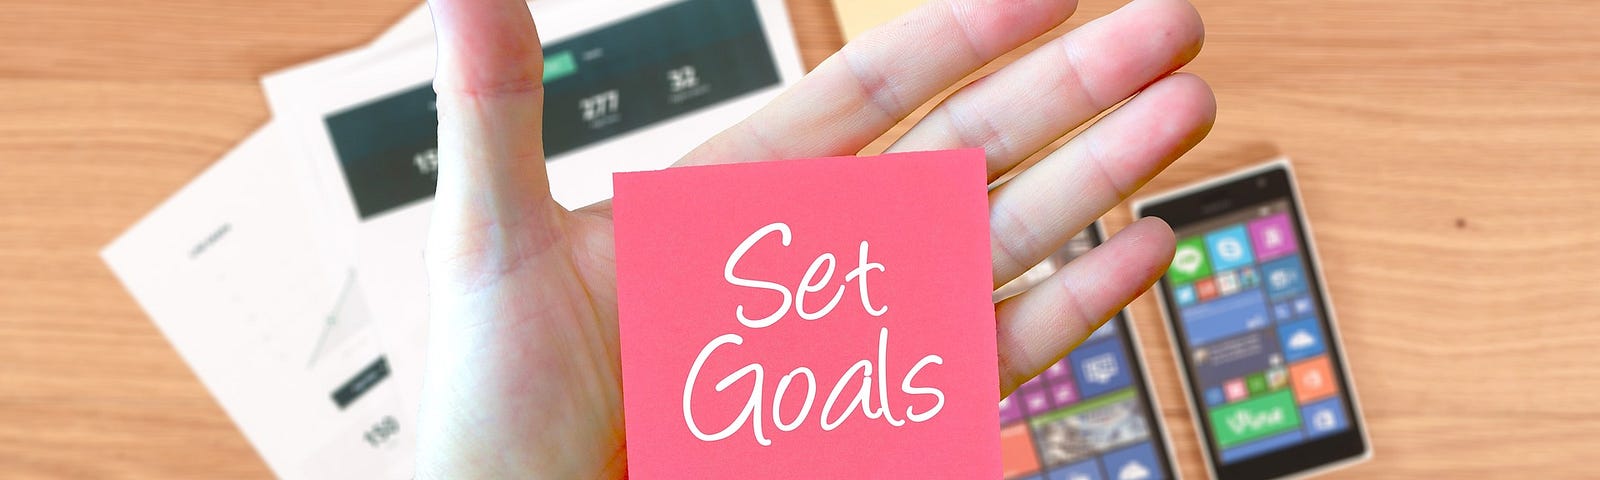 a hand holding a card with “Set goals” written on it